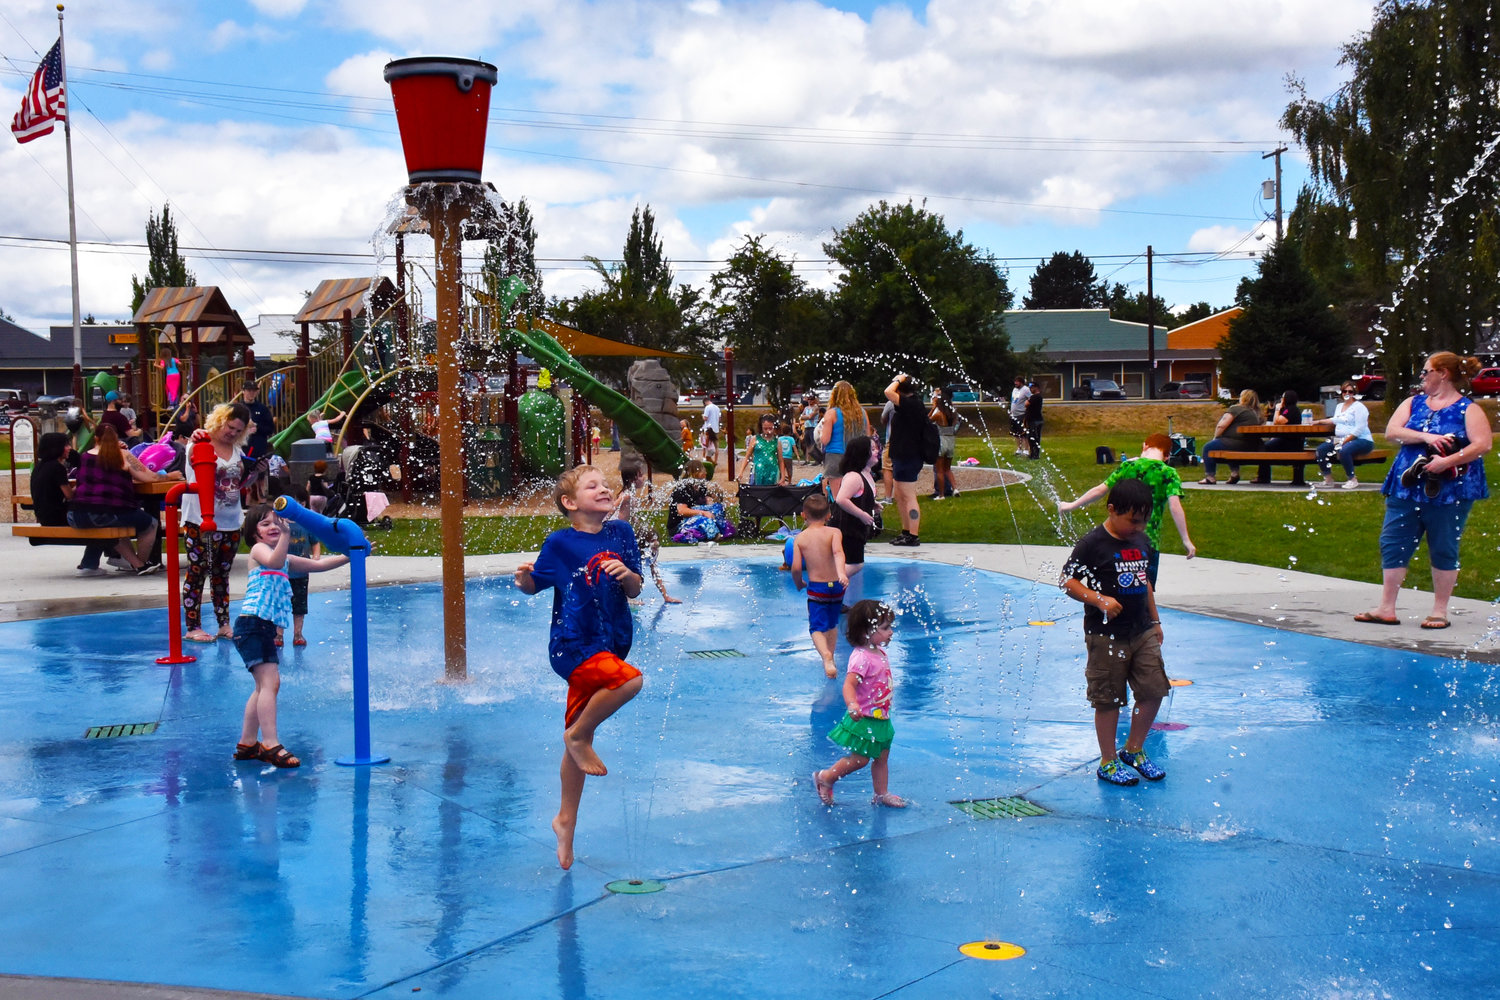 Kids flip their fins through the splash pad at Yelm City Park during the 2021 Yelm Mermaid Festival on Saturday, July 17, an event where 3,900 people came smimming through.